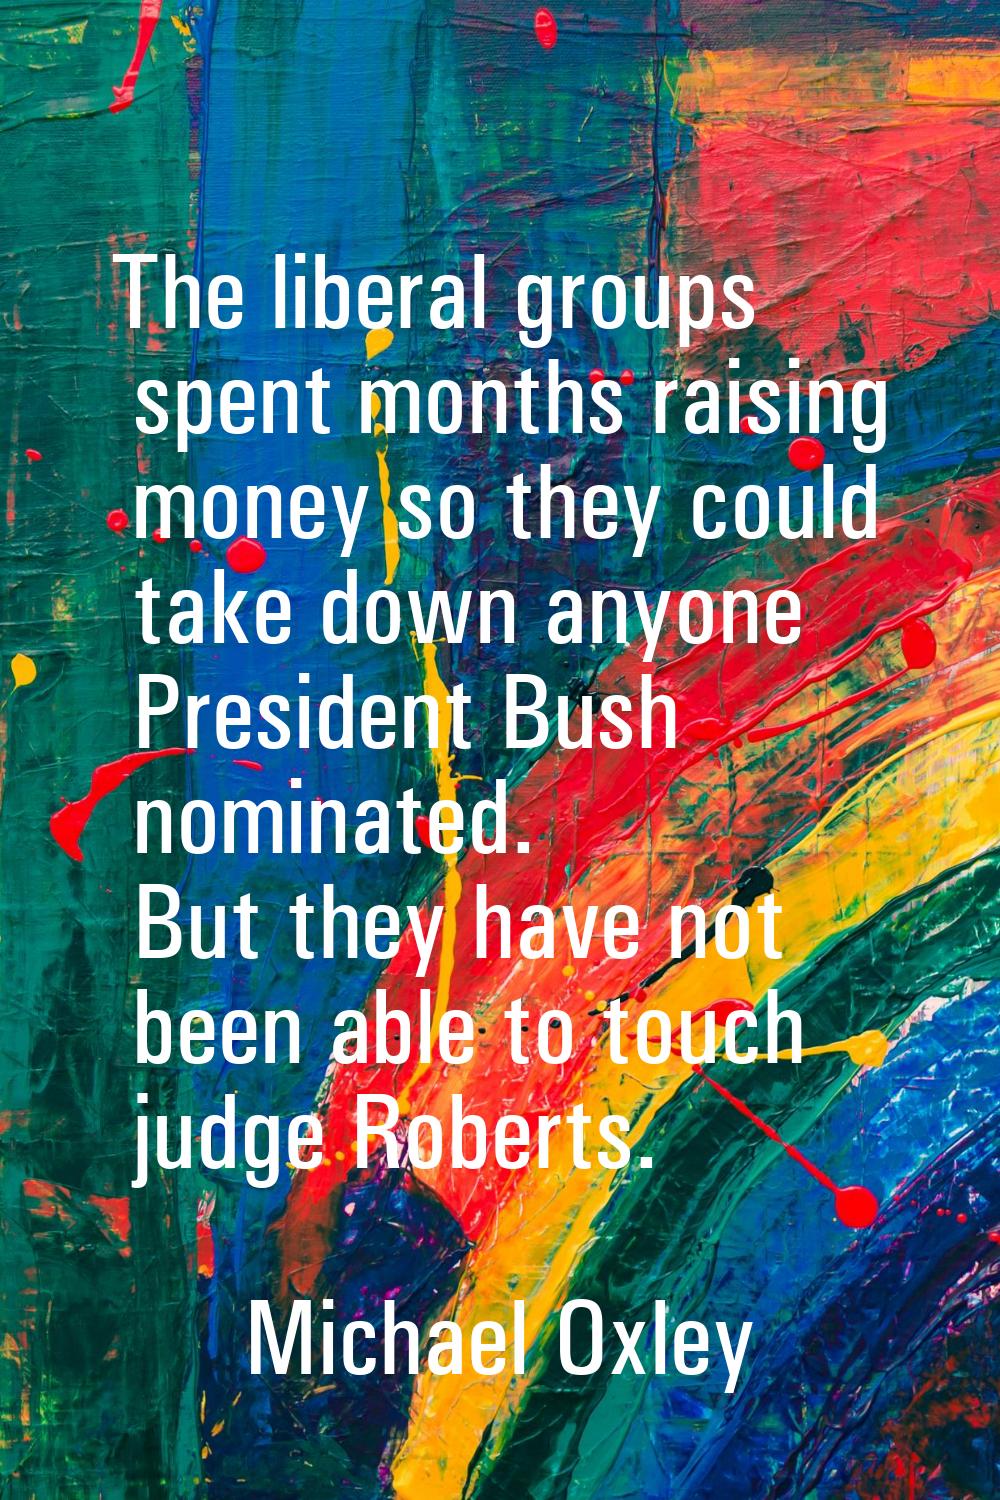 The liberal groups spent months raising money so they could take down anyone President Bush nominat